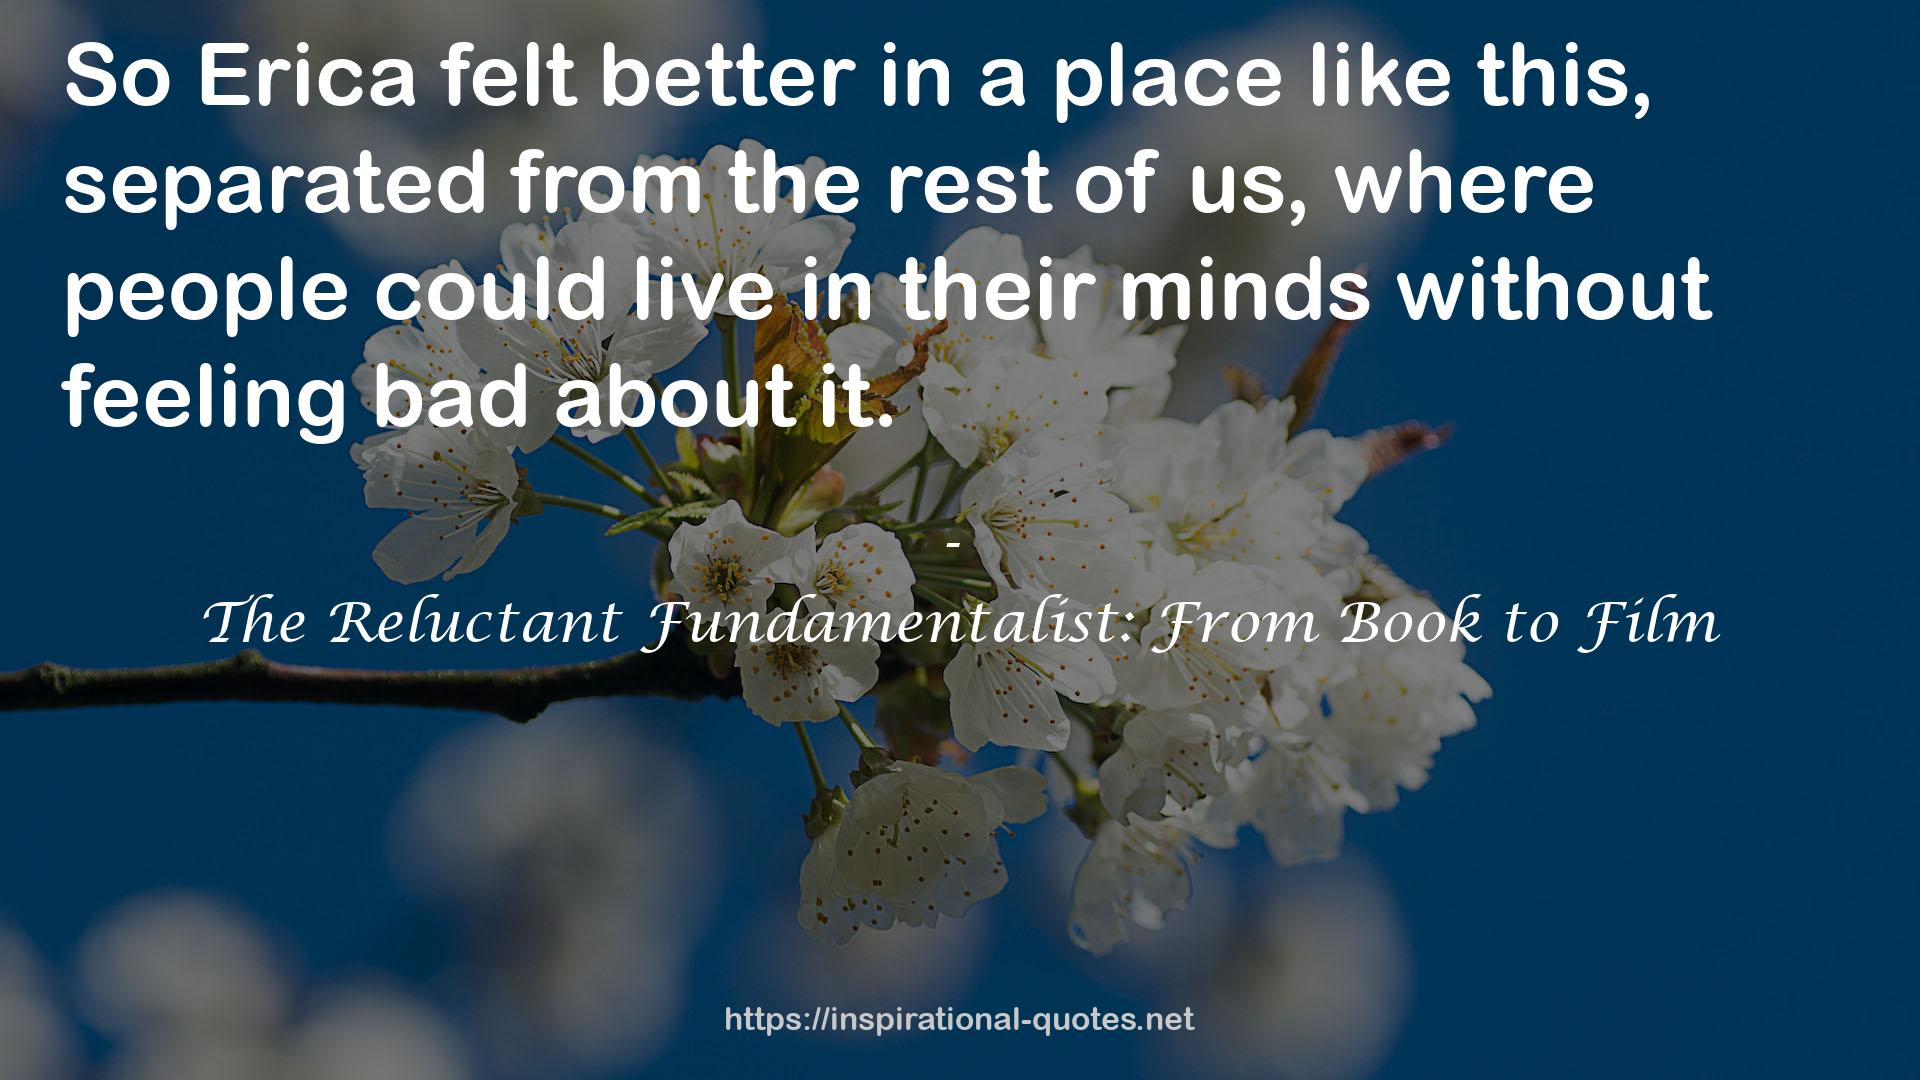 The Reluctant Fundamentalist: From Book to Film QUOTES